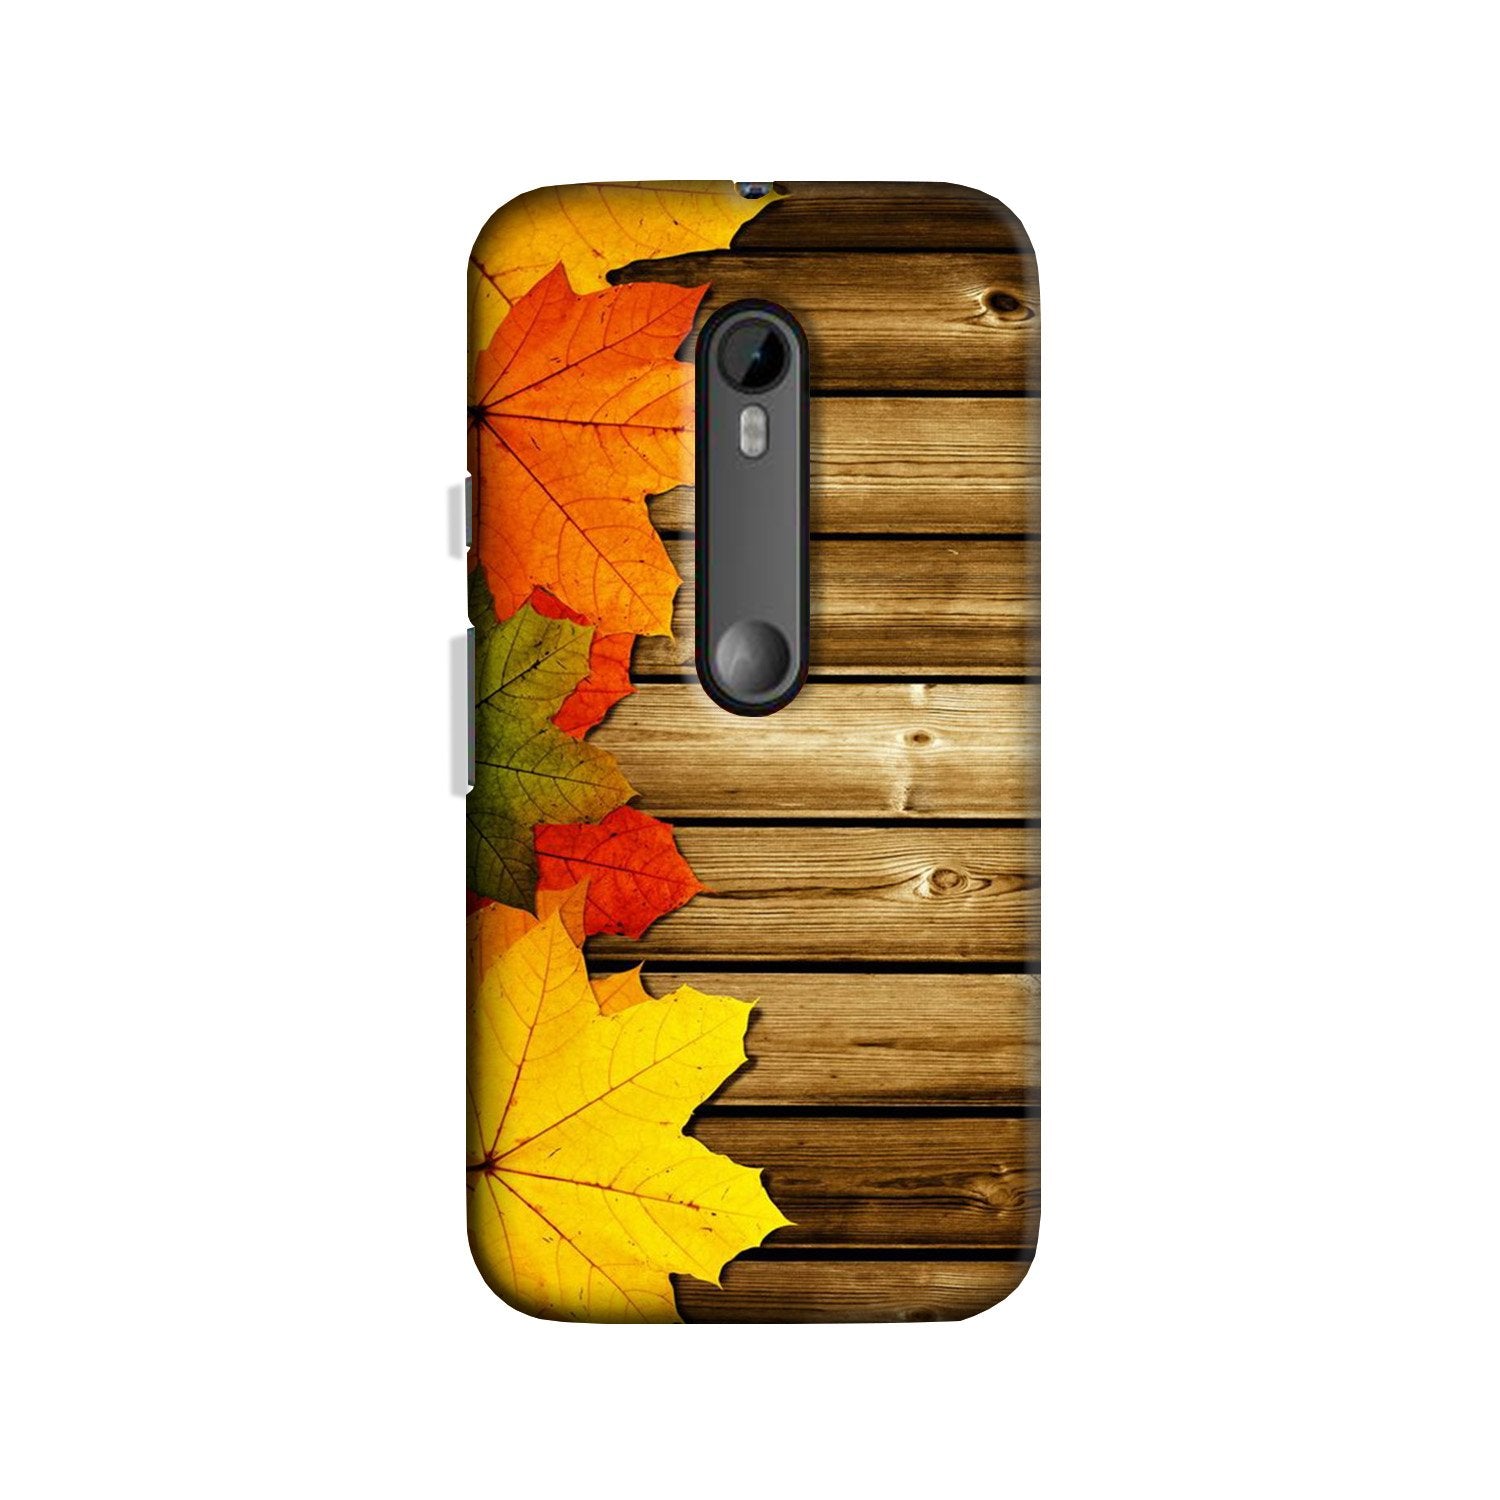 Wooden look3 Case for Moto X Play